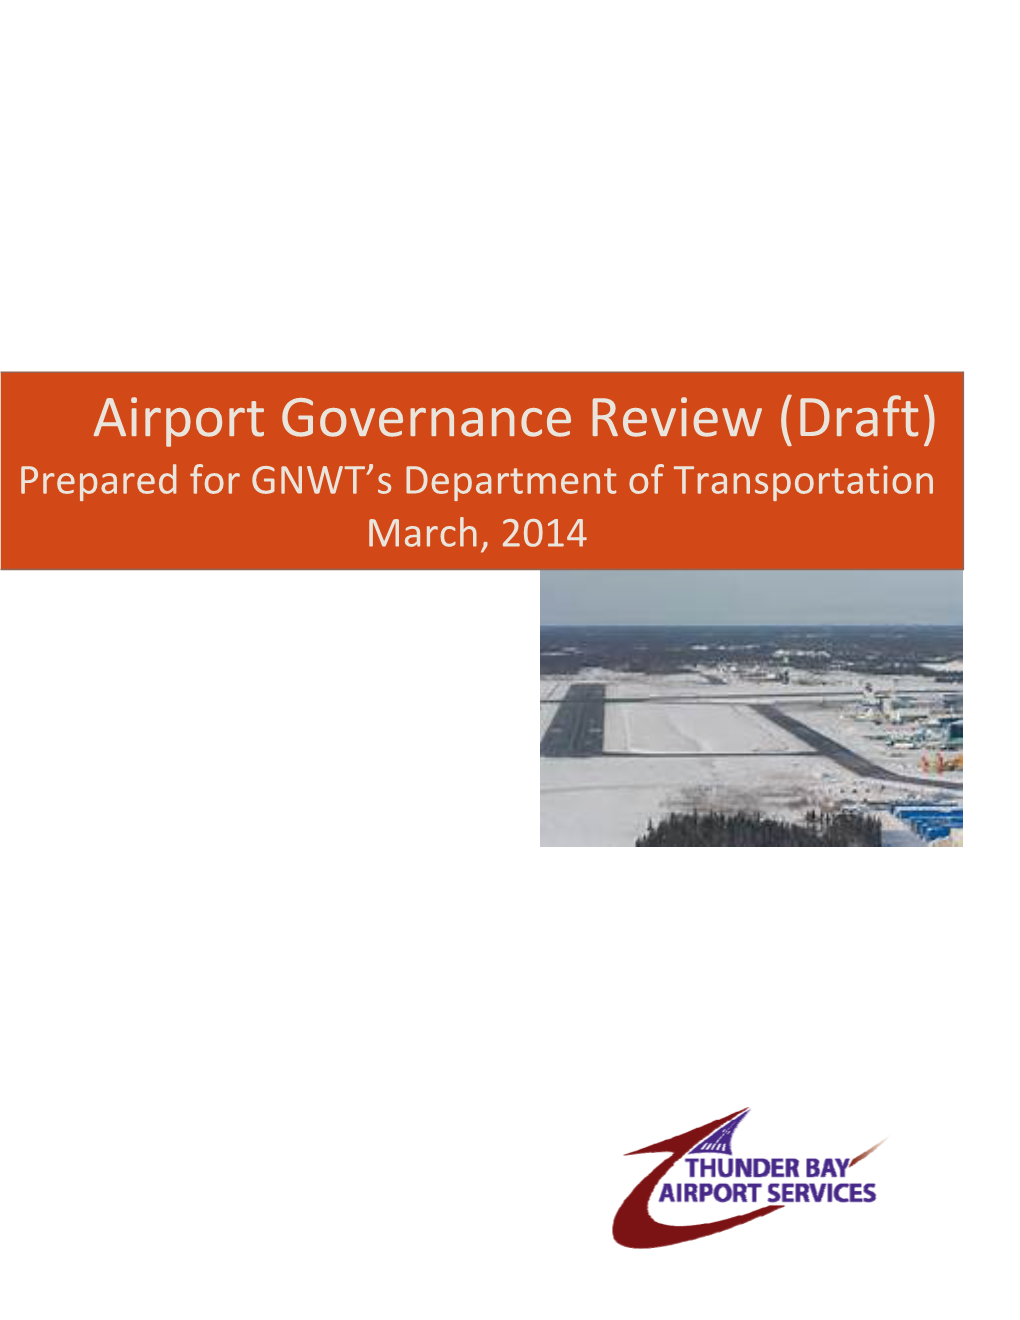 Airport Governance Review (Draft) Prepared for GNWT’S Department of Transportation March, 2014 Airport Governance Review (Draft) 1